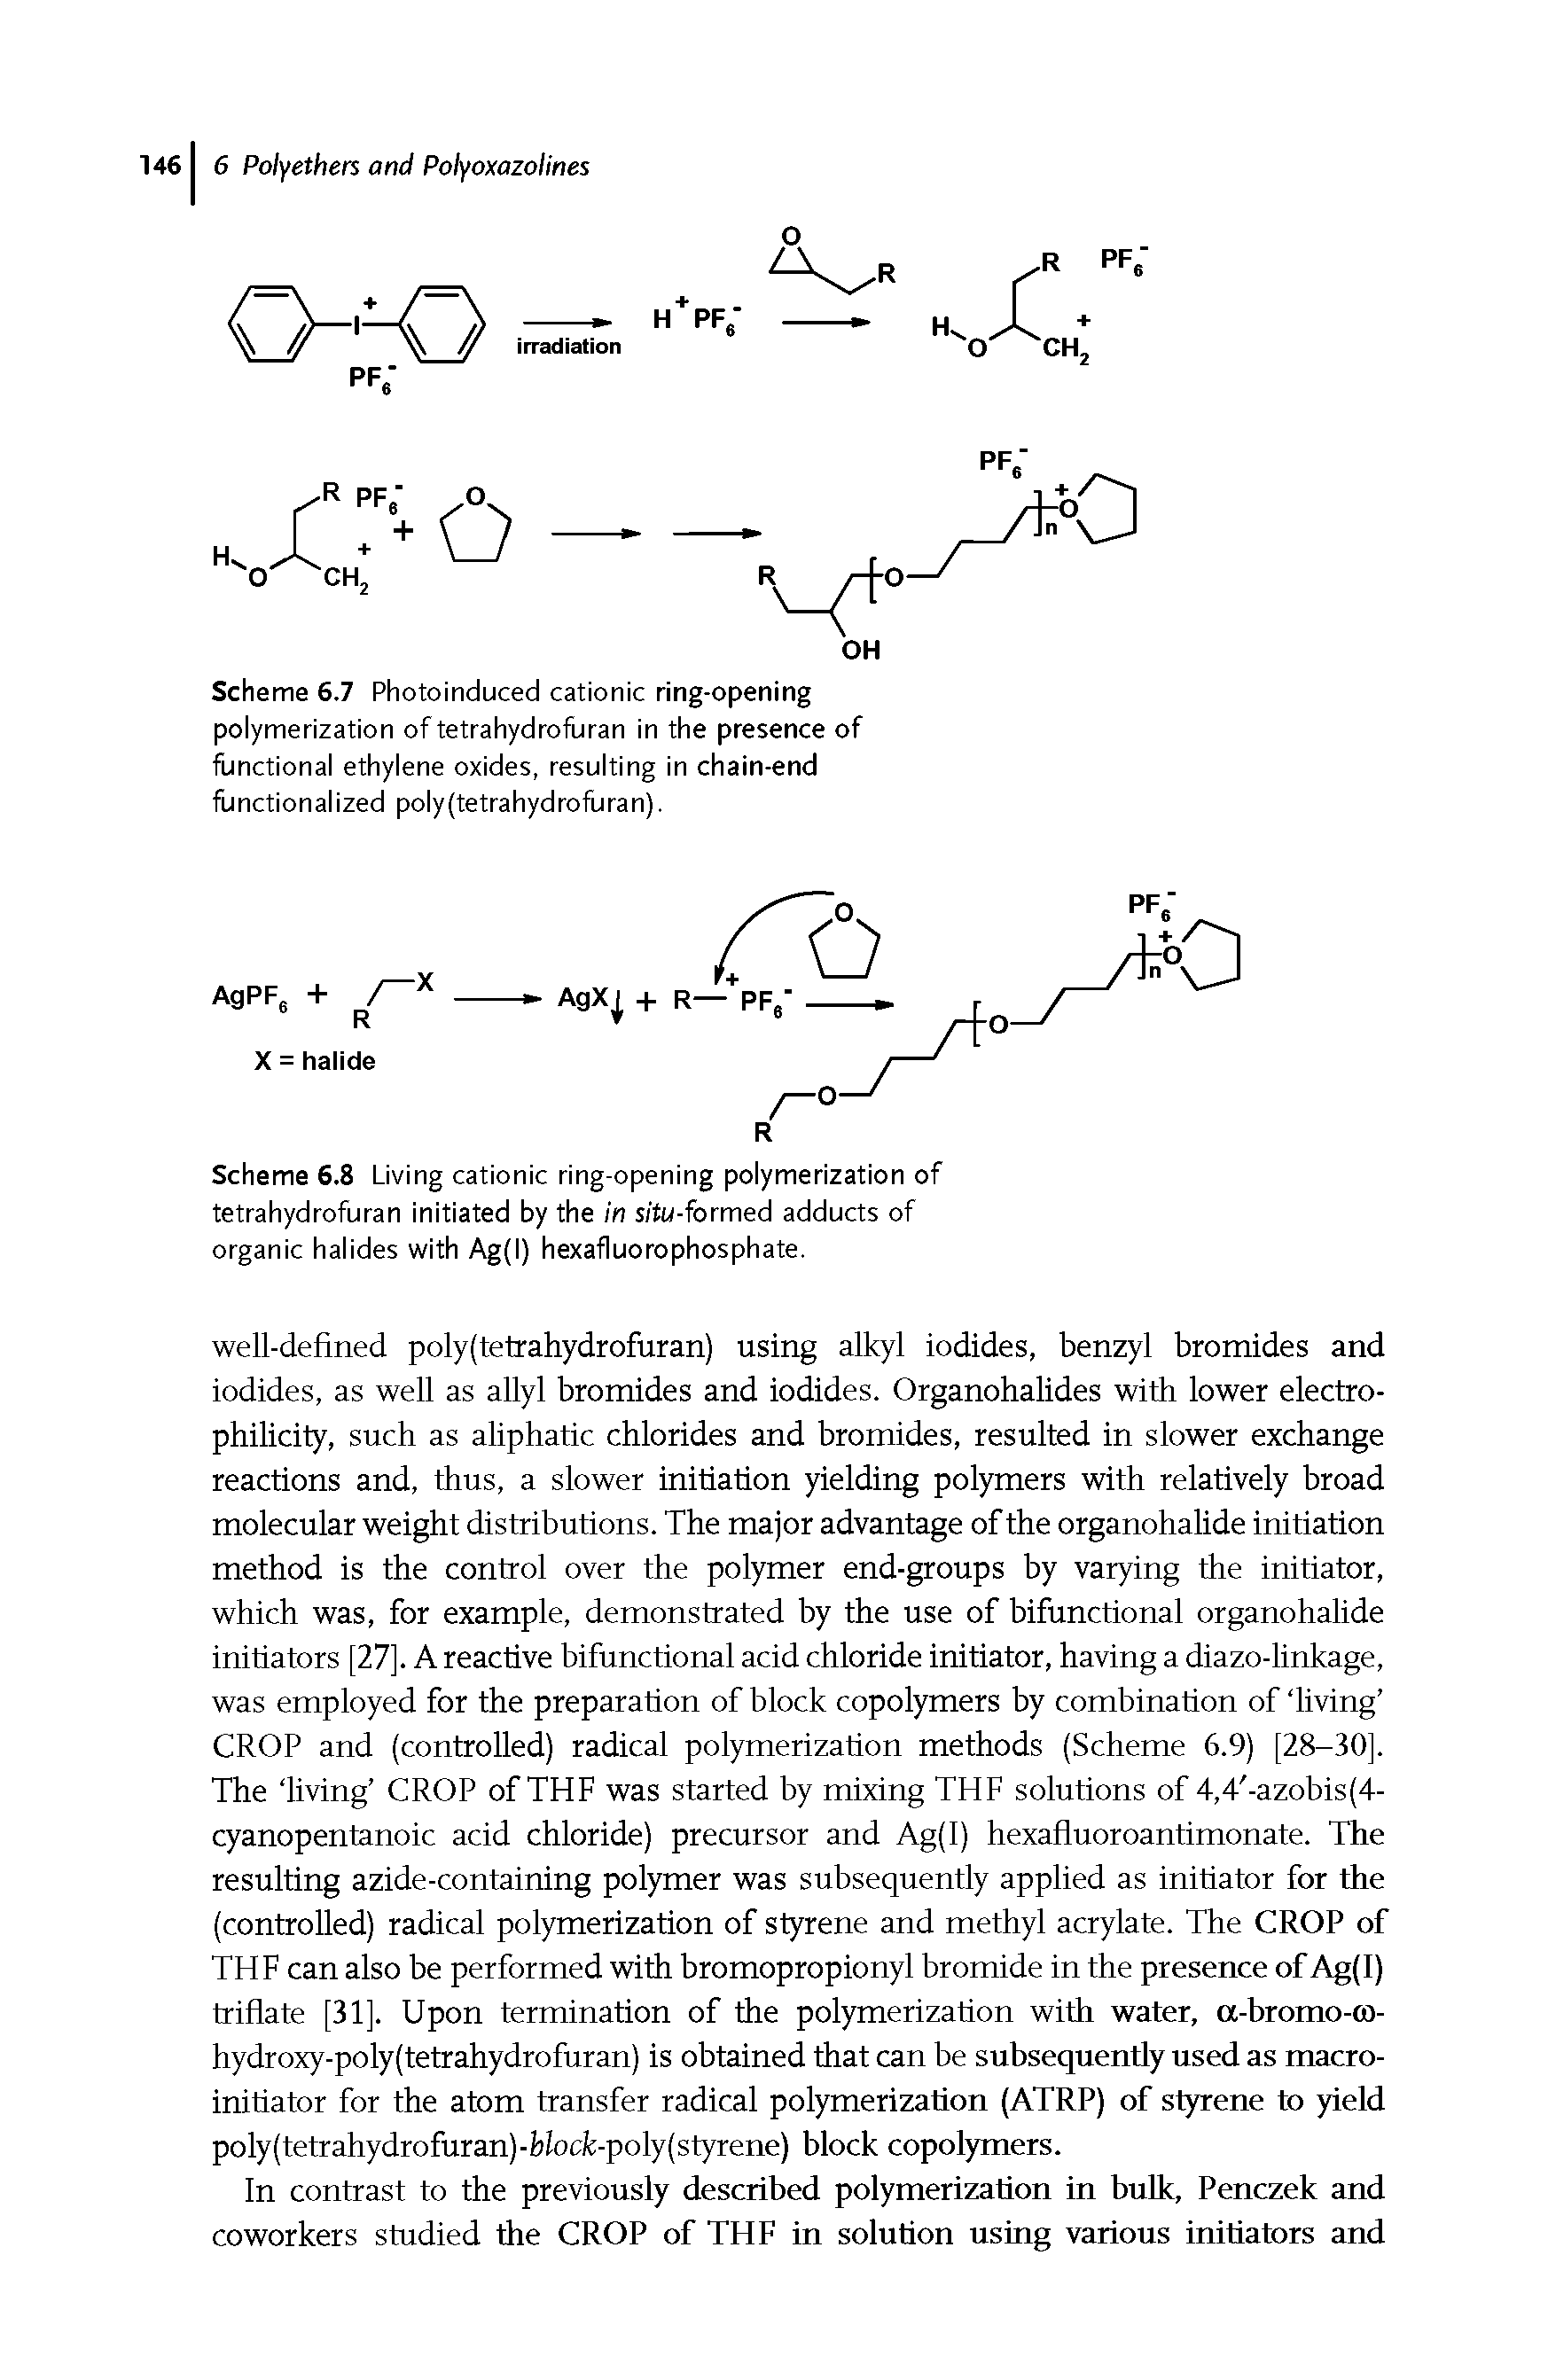 Scheme 6.7 Photoinduced cationic ring-opening polymerization of tetrahydrofliran in the presence of functional ethylene oxides, resulting in chain-end functionalized poly(tetrahydrofliran).